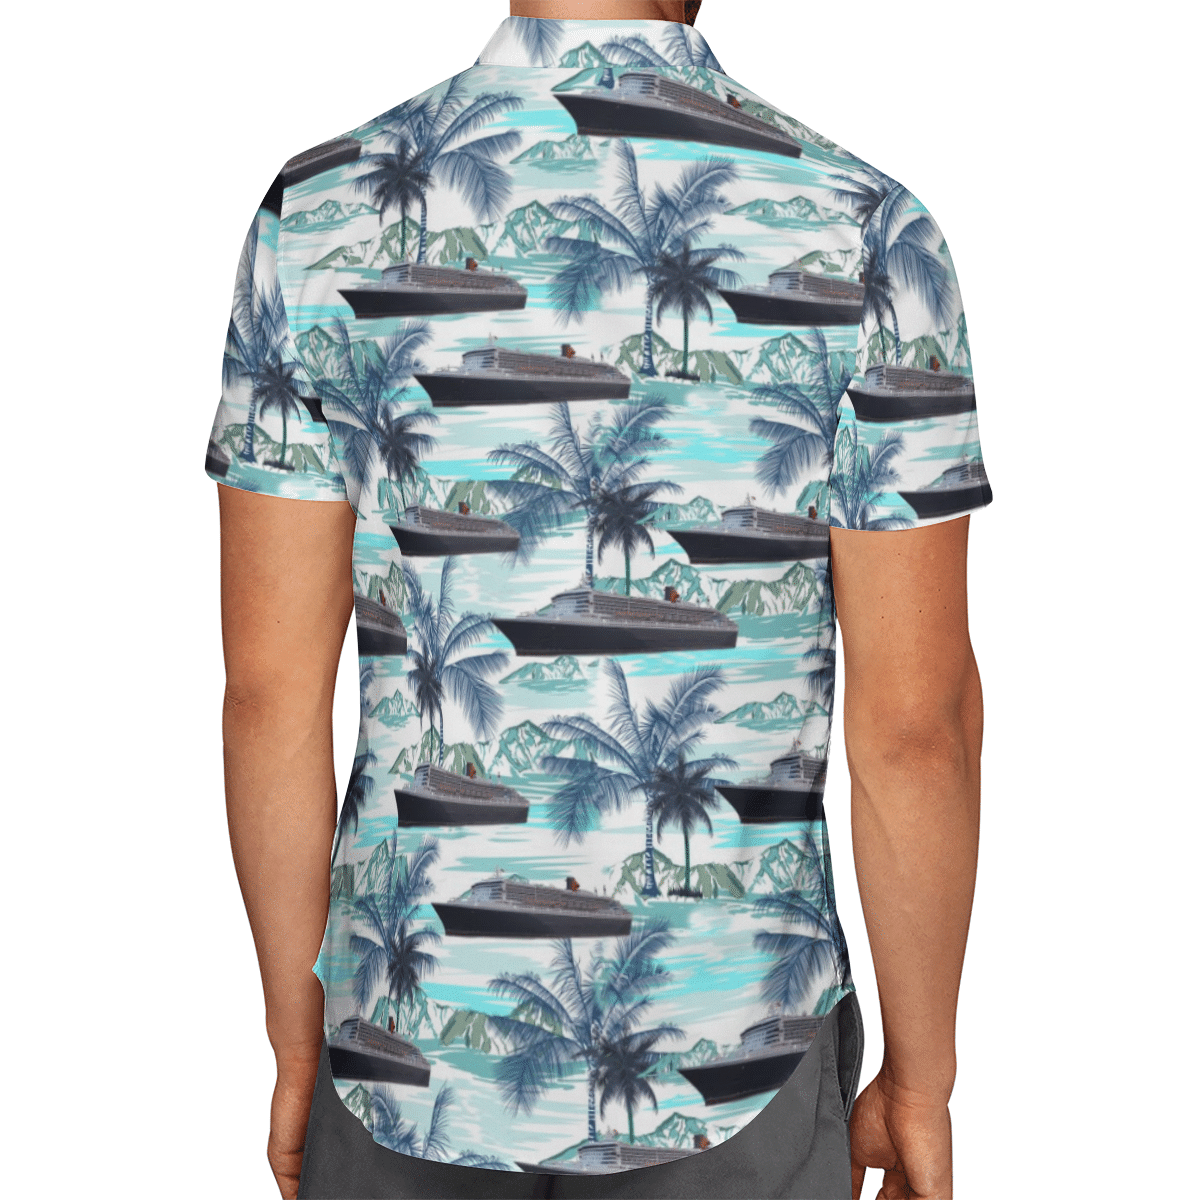 Going to the beach with a quality shirt 25